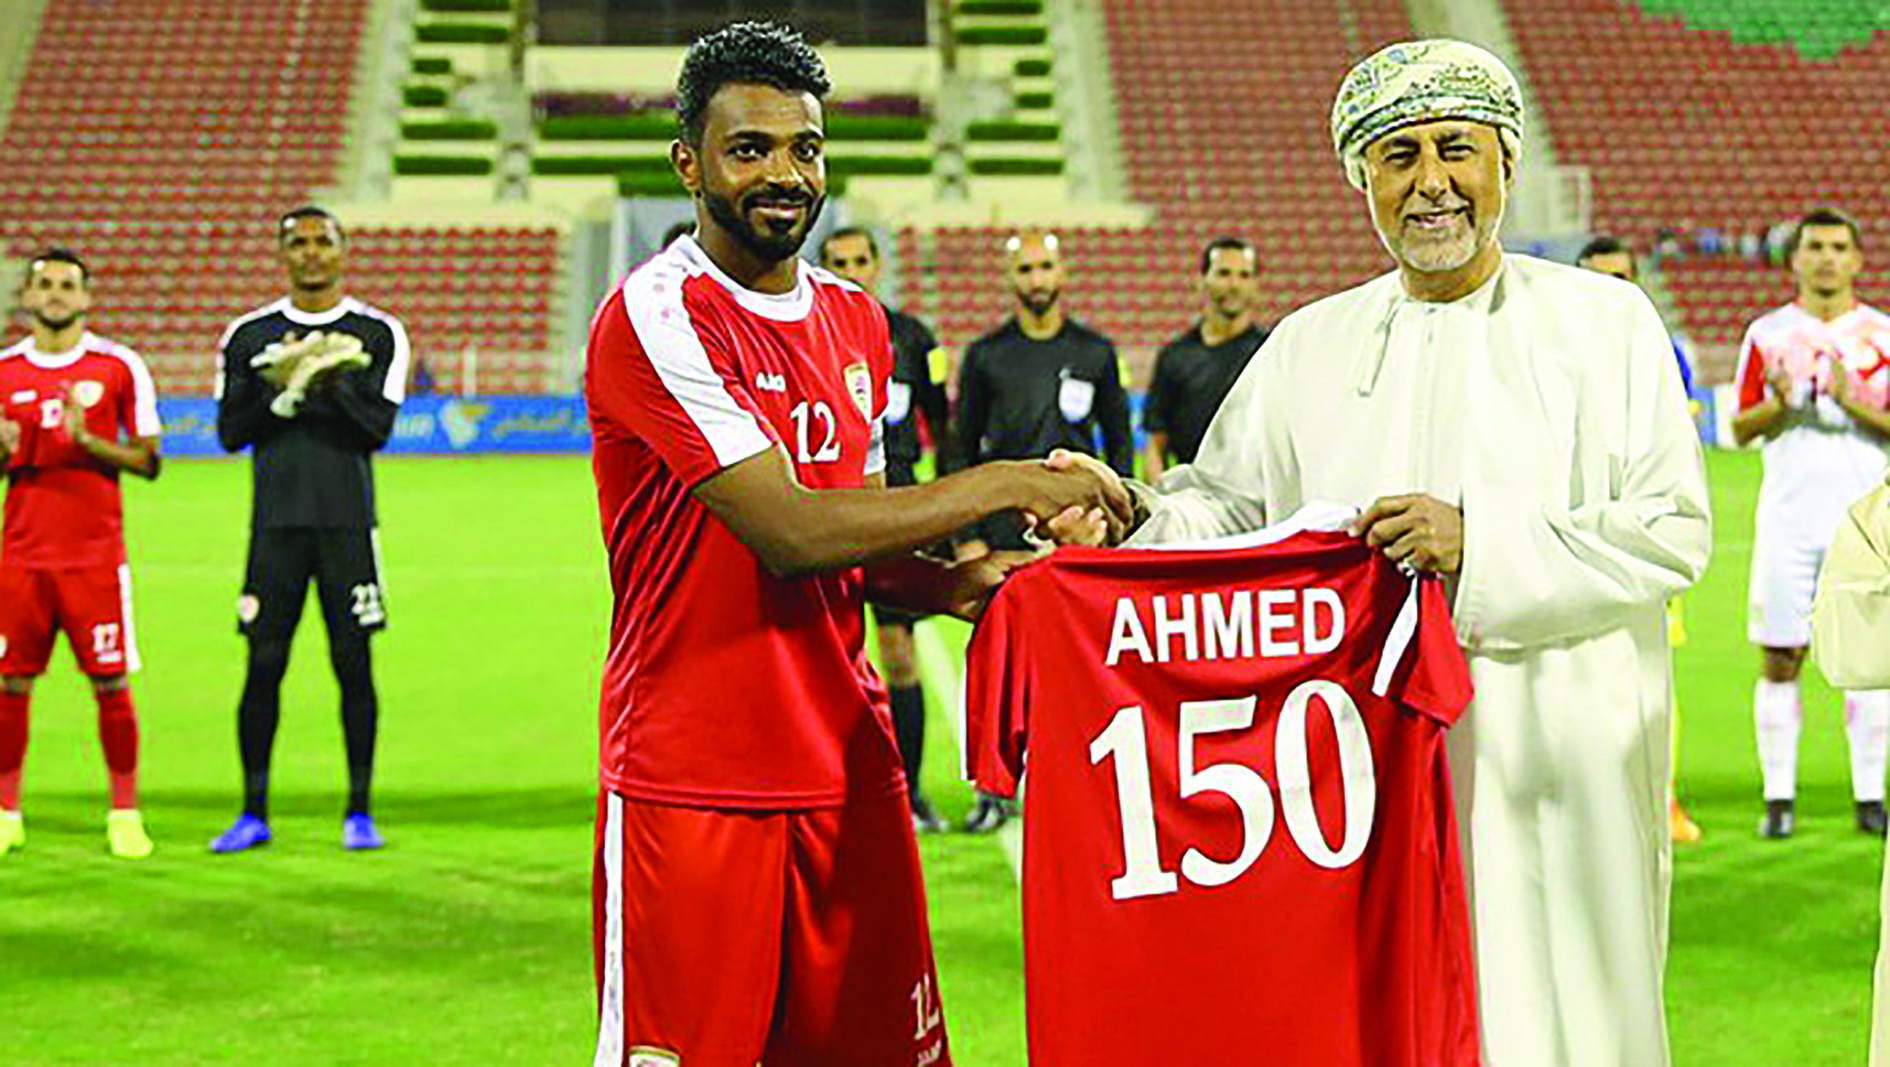 Omani footballer Ahmed thanks fans for their support